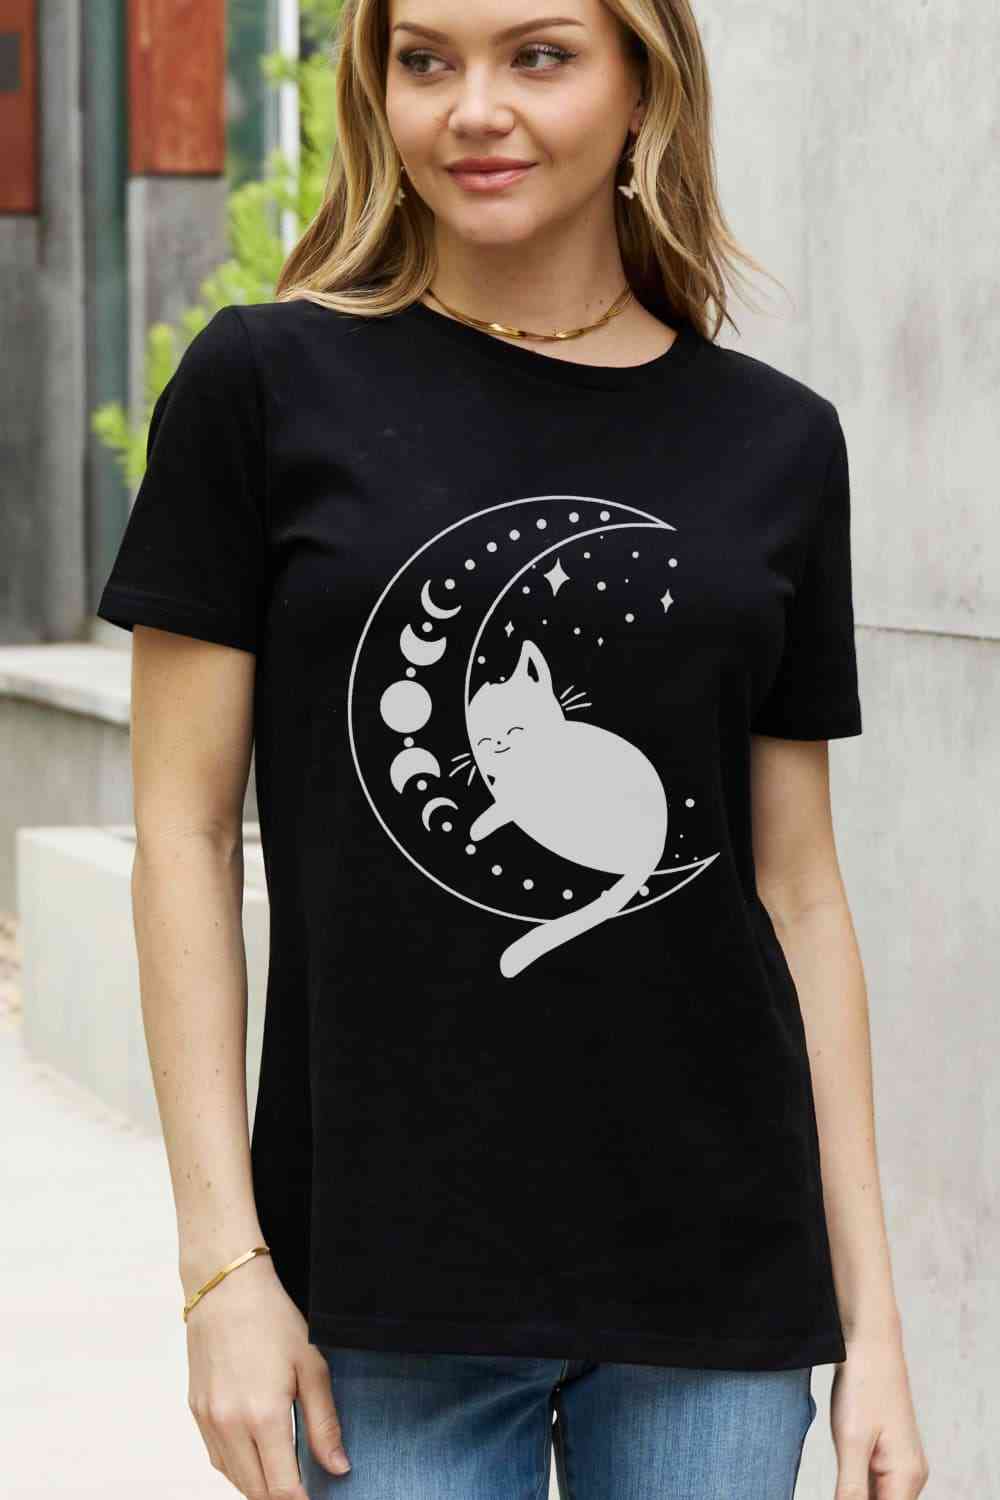 Simply Love Full Size Cat Moon Graphic Cotton Tee Graphic Tees JT's Designer Fashion